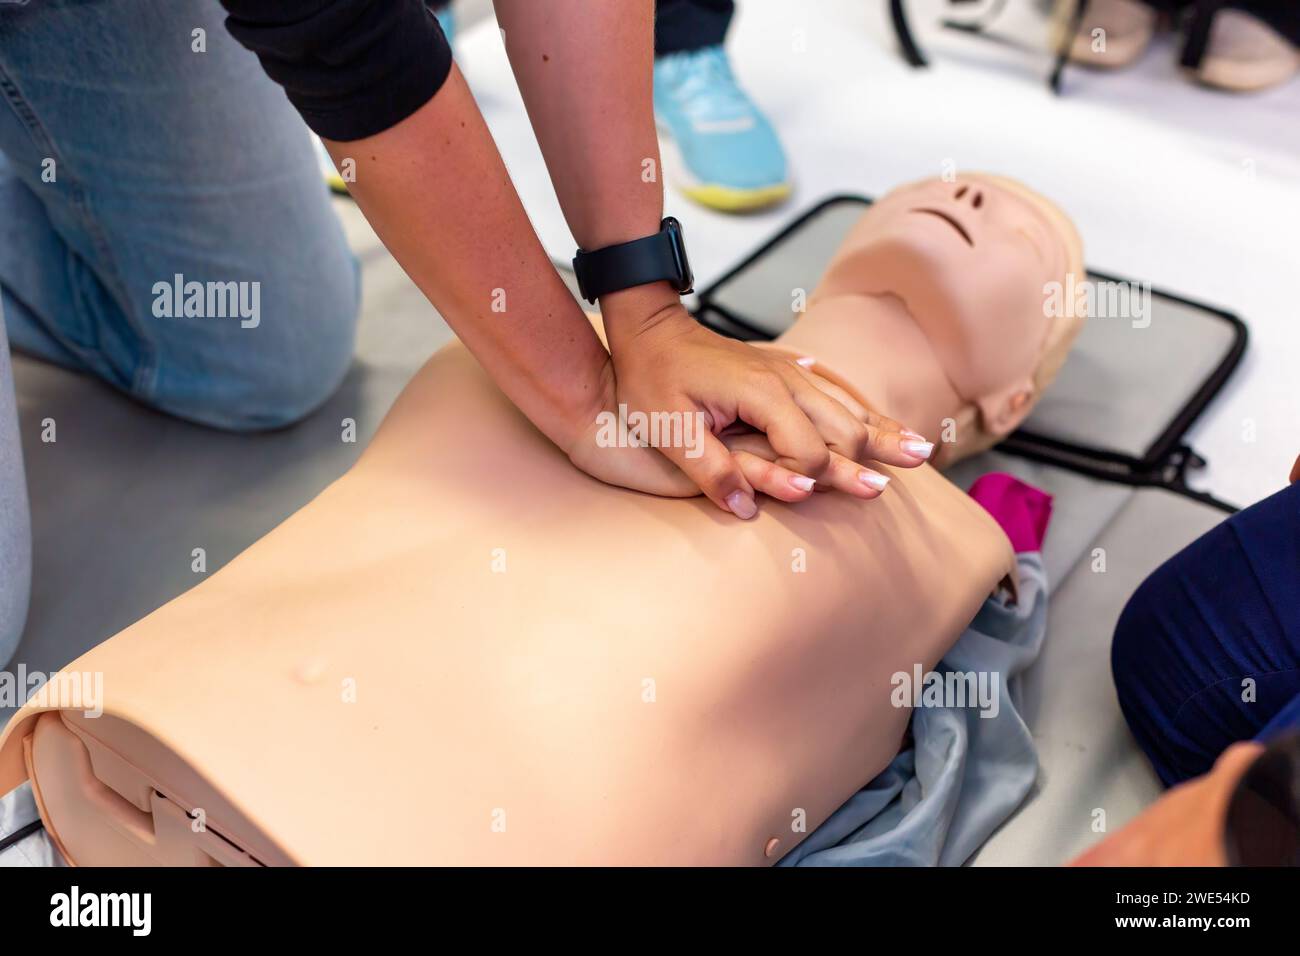 Close-up of hands performing CPR on a training manikin during a first aid class. Stock Photo